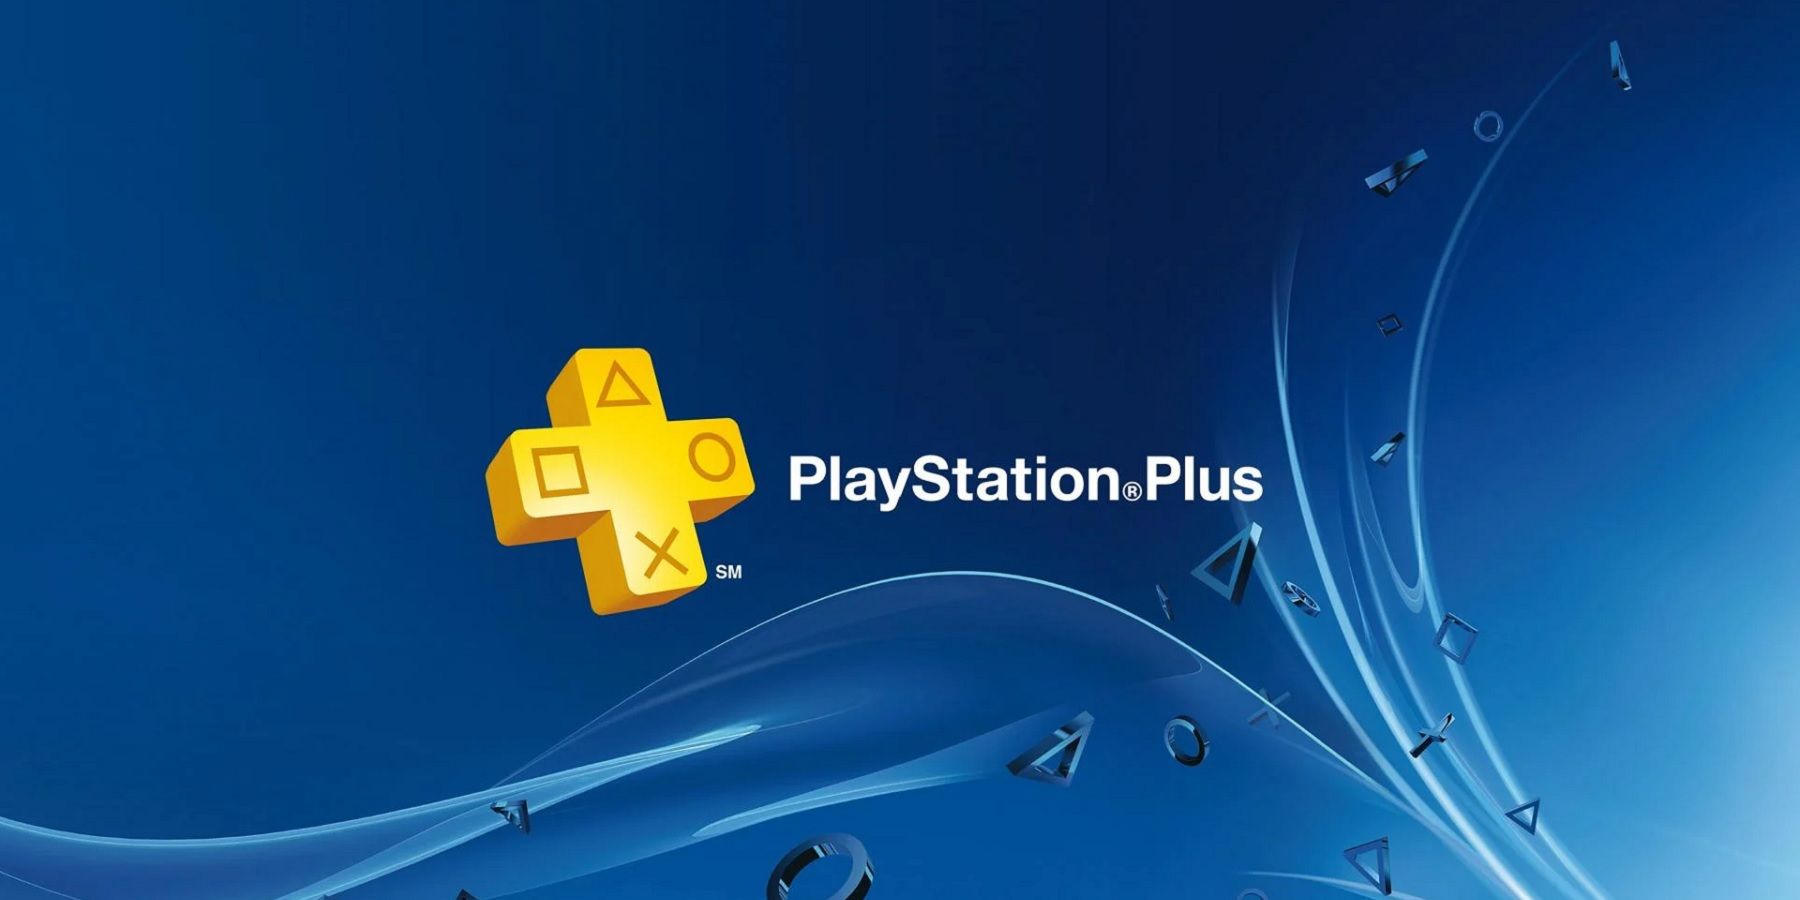 PS Plus Free Games For October Are Available Now - GameSpot